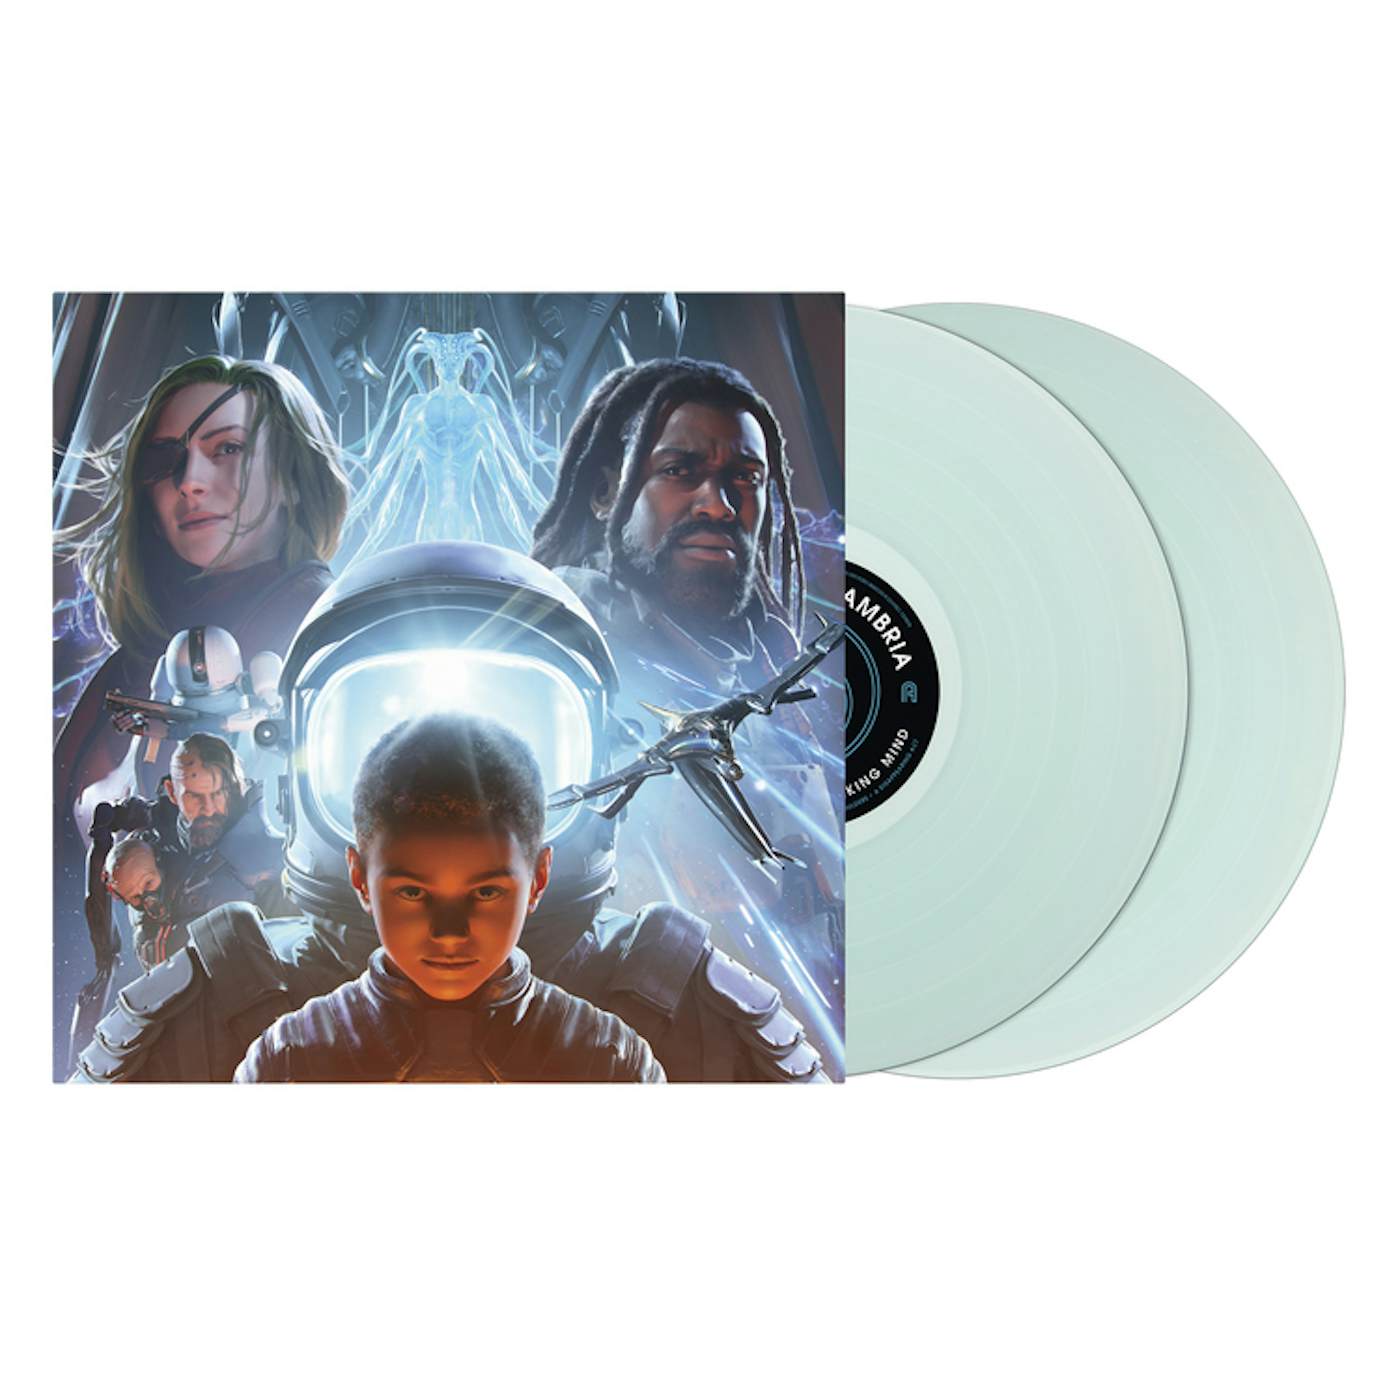 Coheed and Cambria Vaxis II: A Window Of The Waking Mind Vinyl Record